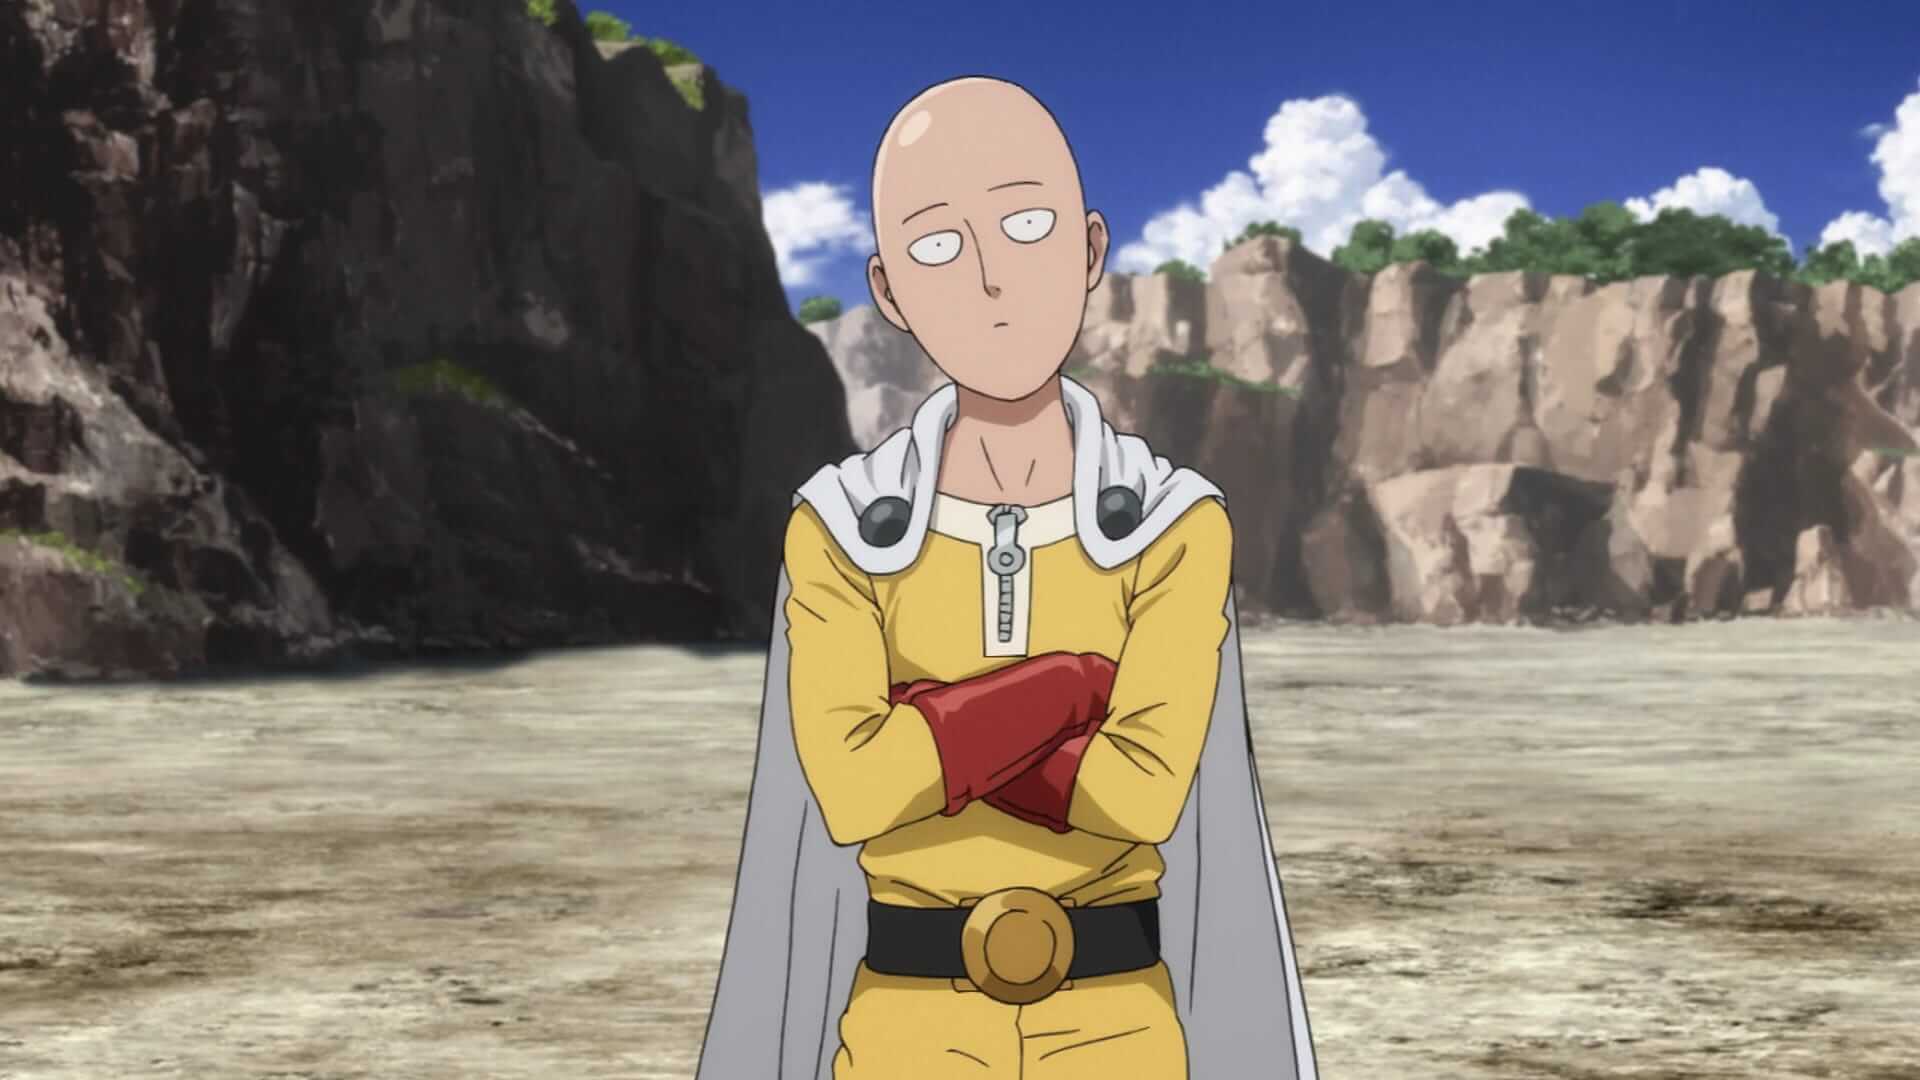 One Punch Man.